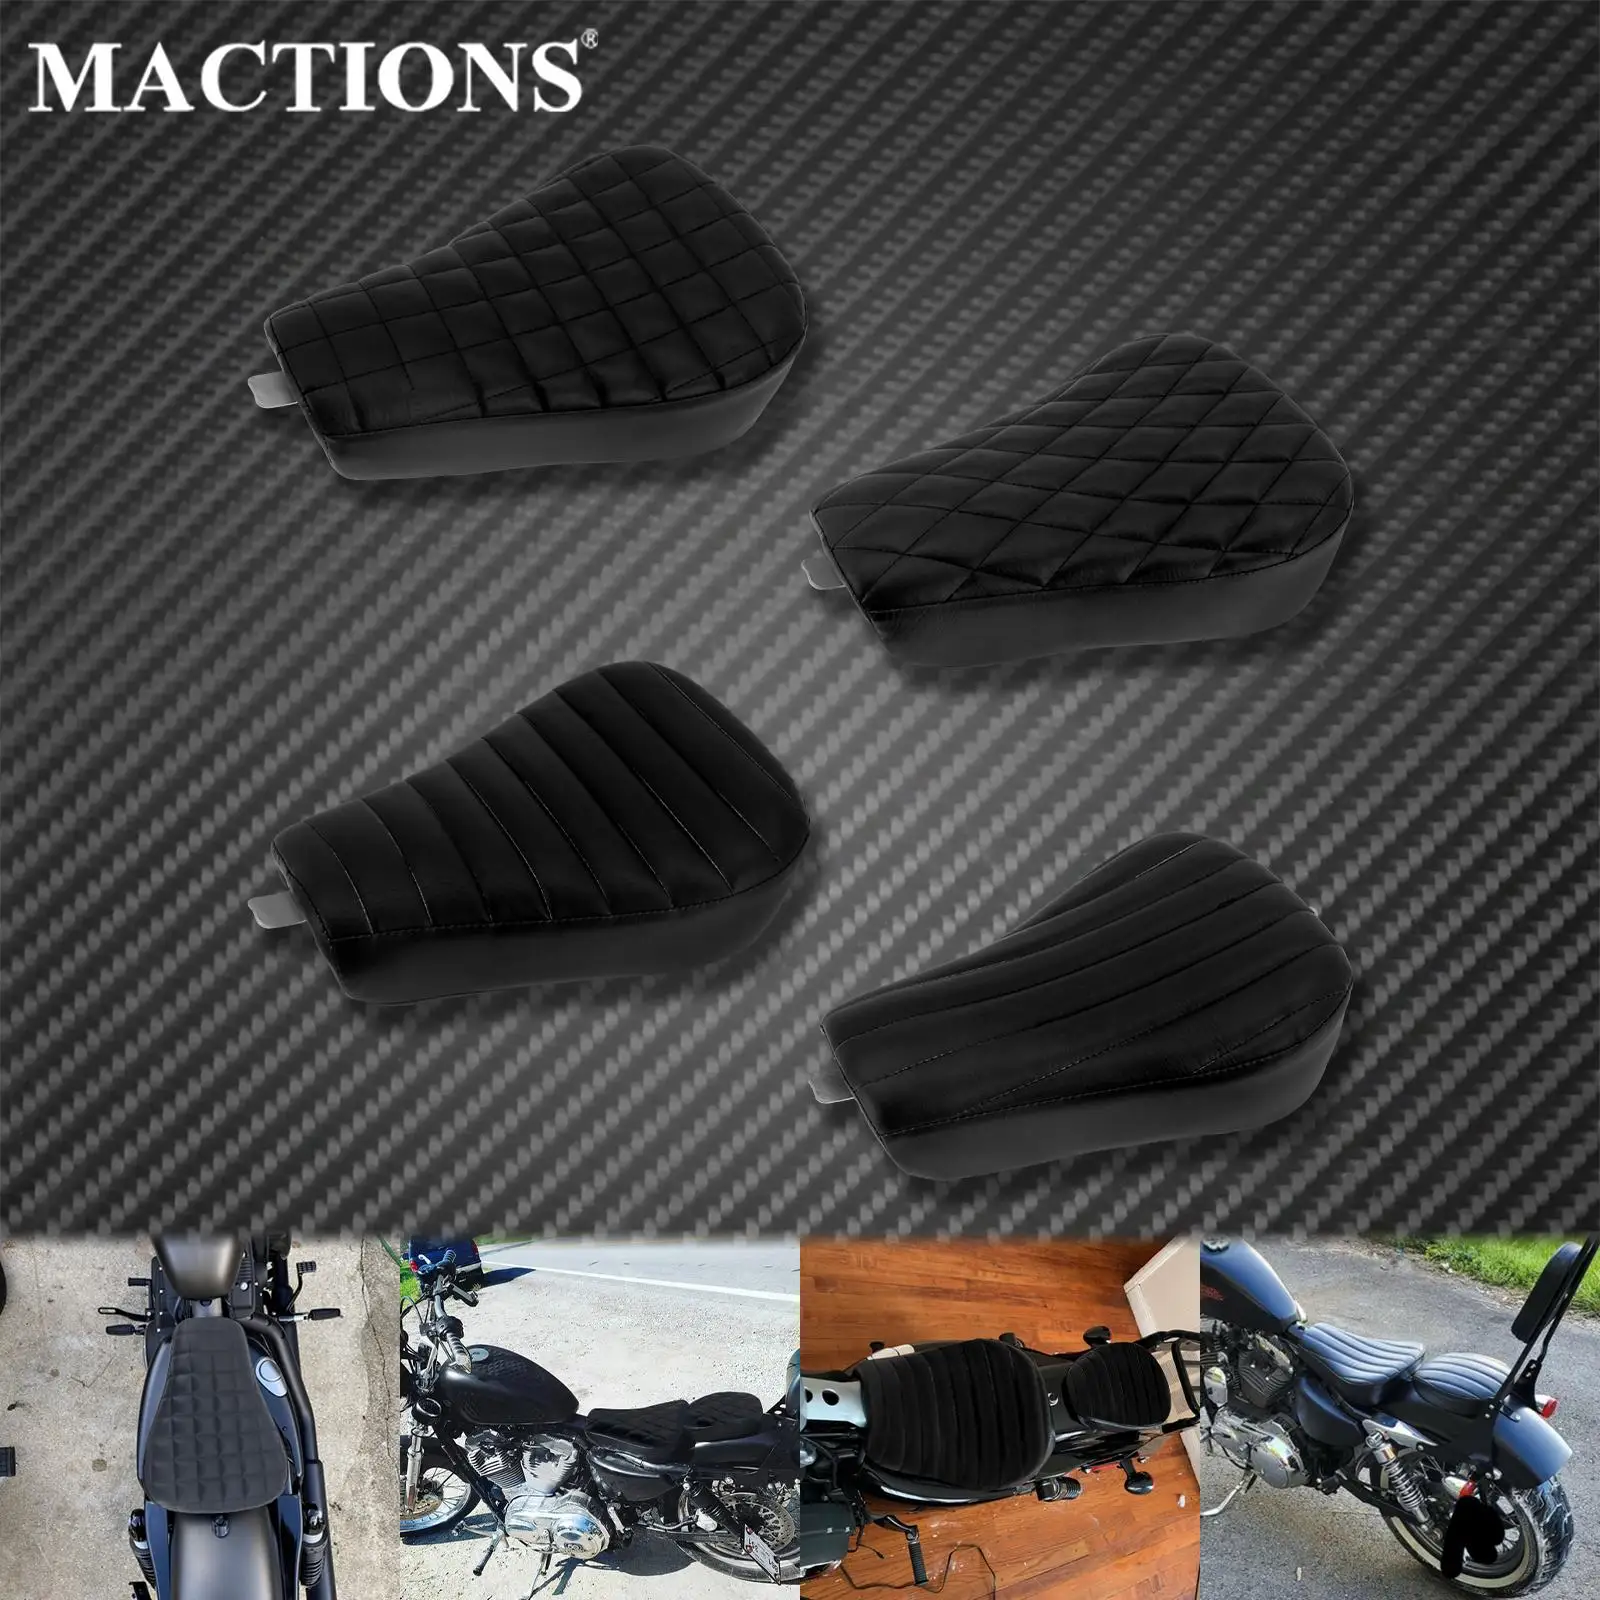 

Motorcycle Black Driver Leather Pillow Solo Seat Cushion For Harley Sportster Forty Eight XL1200 XL883 XL 883 72 48 2004-2015